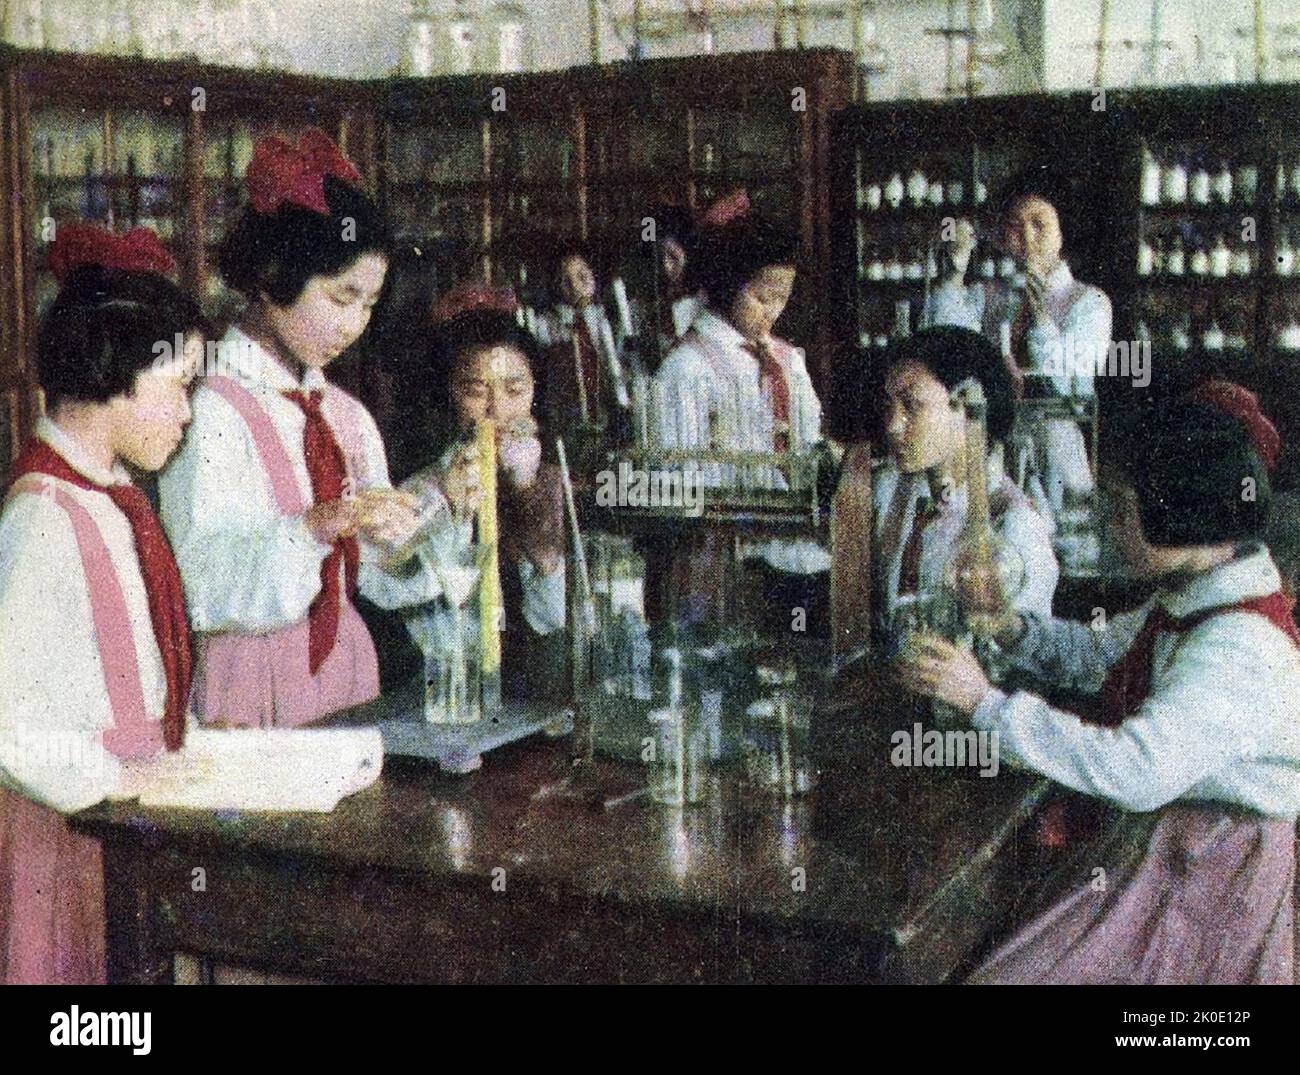 One of a series of North Korean propaganda photographs to show children at school in seemingly prosperous North Korea, 1963. Stock Photo